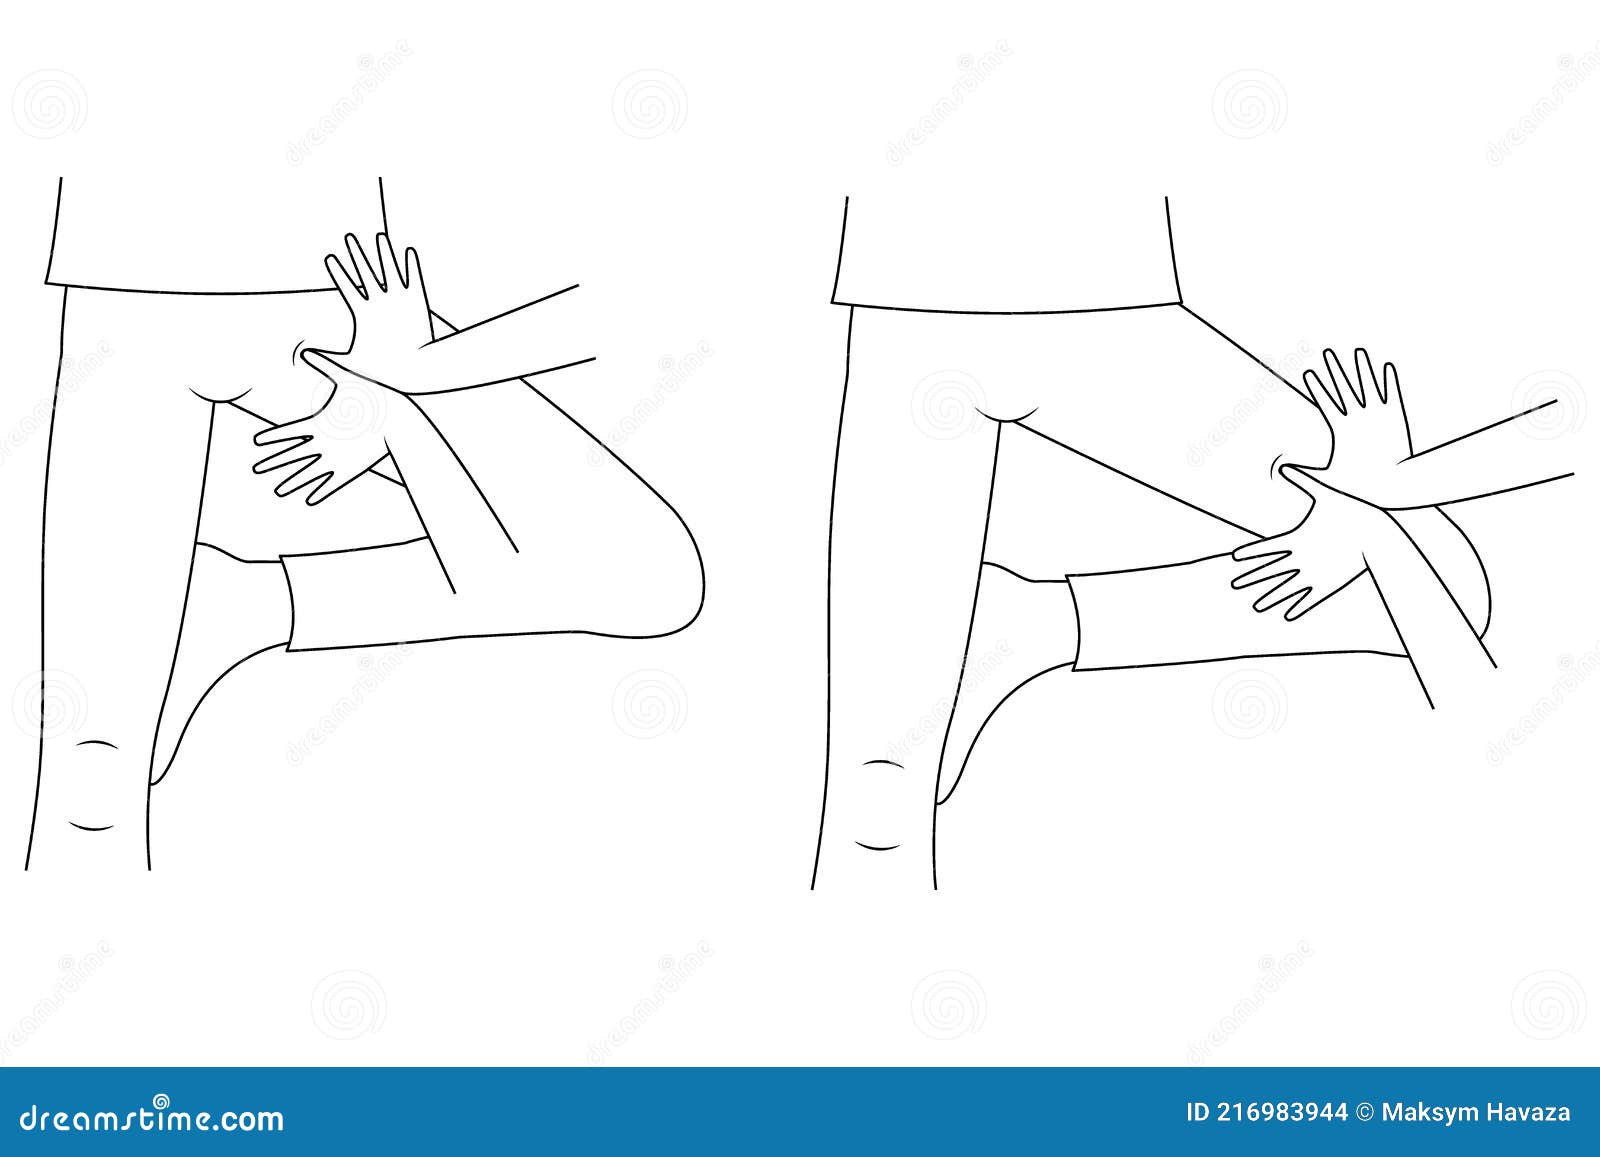 Simple Massage Techniques With Illustrations for Beginners